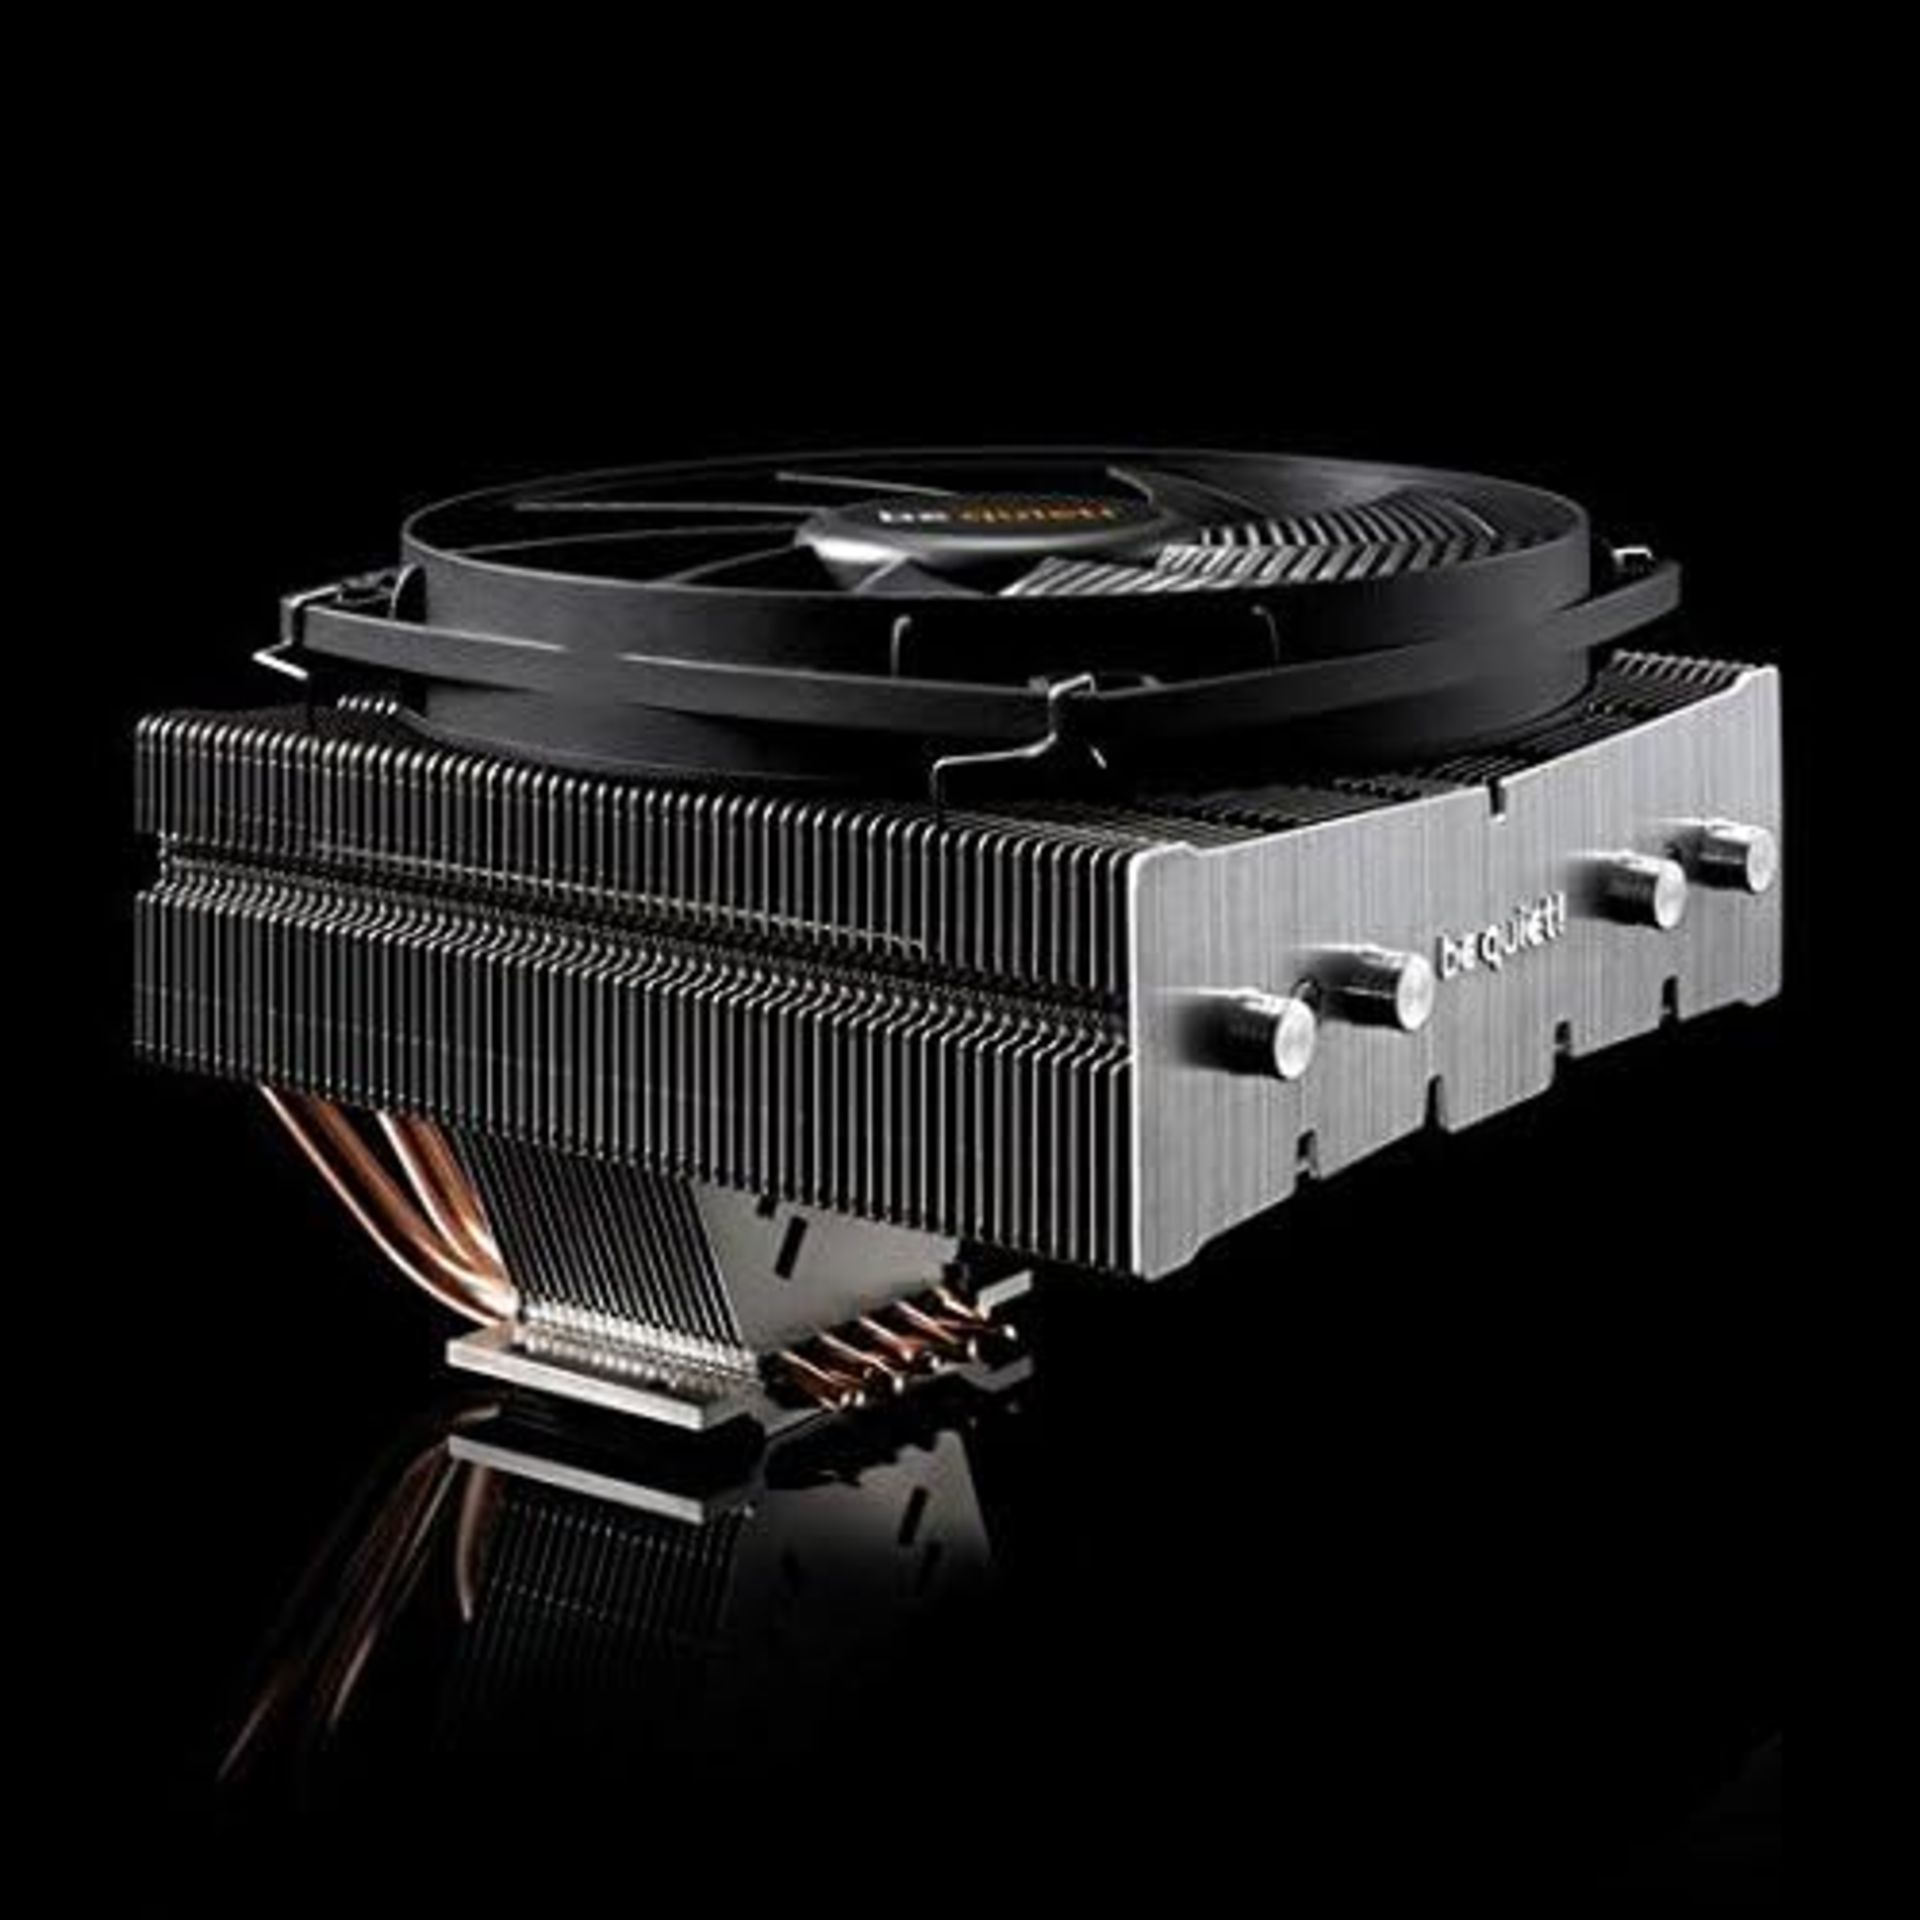 NEW & BOXED BE QUIET! Shadow Rock TF 2 CPU Cooler. RRP £59.99. Shadow Rock TF 2 is the perfect - Image 6 of 7